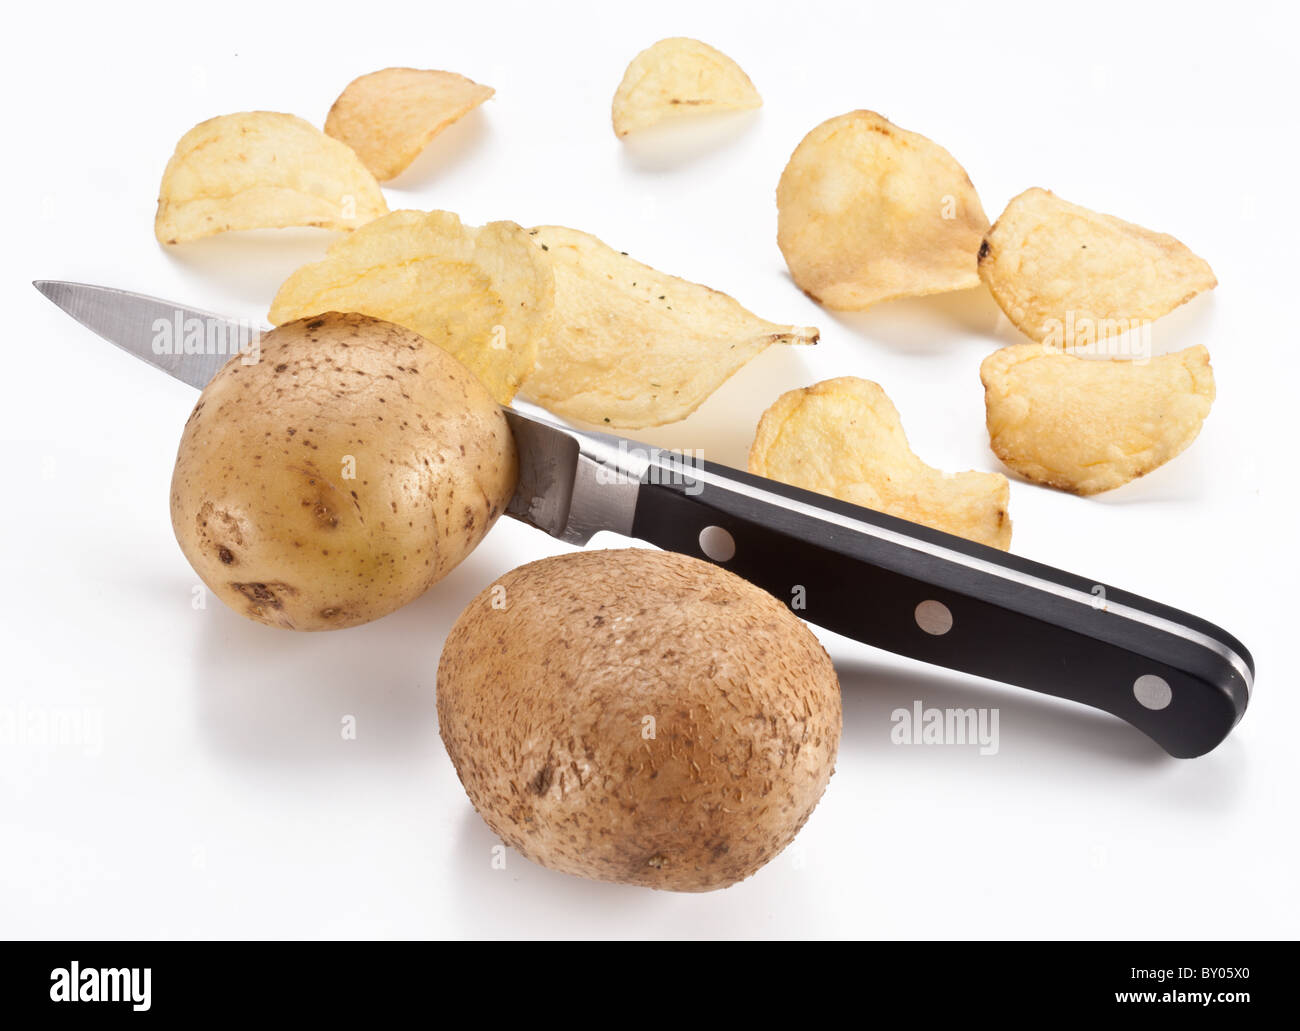 https://c8.alamy.com/comp/BY05X0/conceptual-image-the-knife-cuts-fresh-potatoes-and-potato-chips-are-BY05X0.jpg